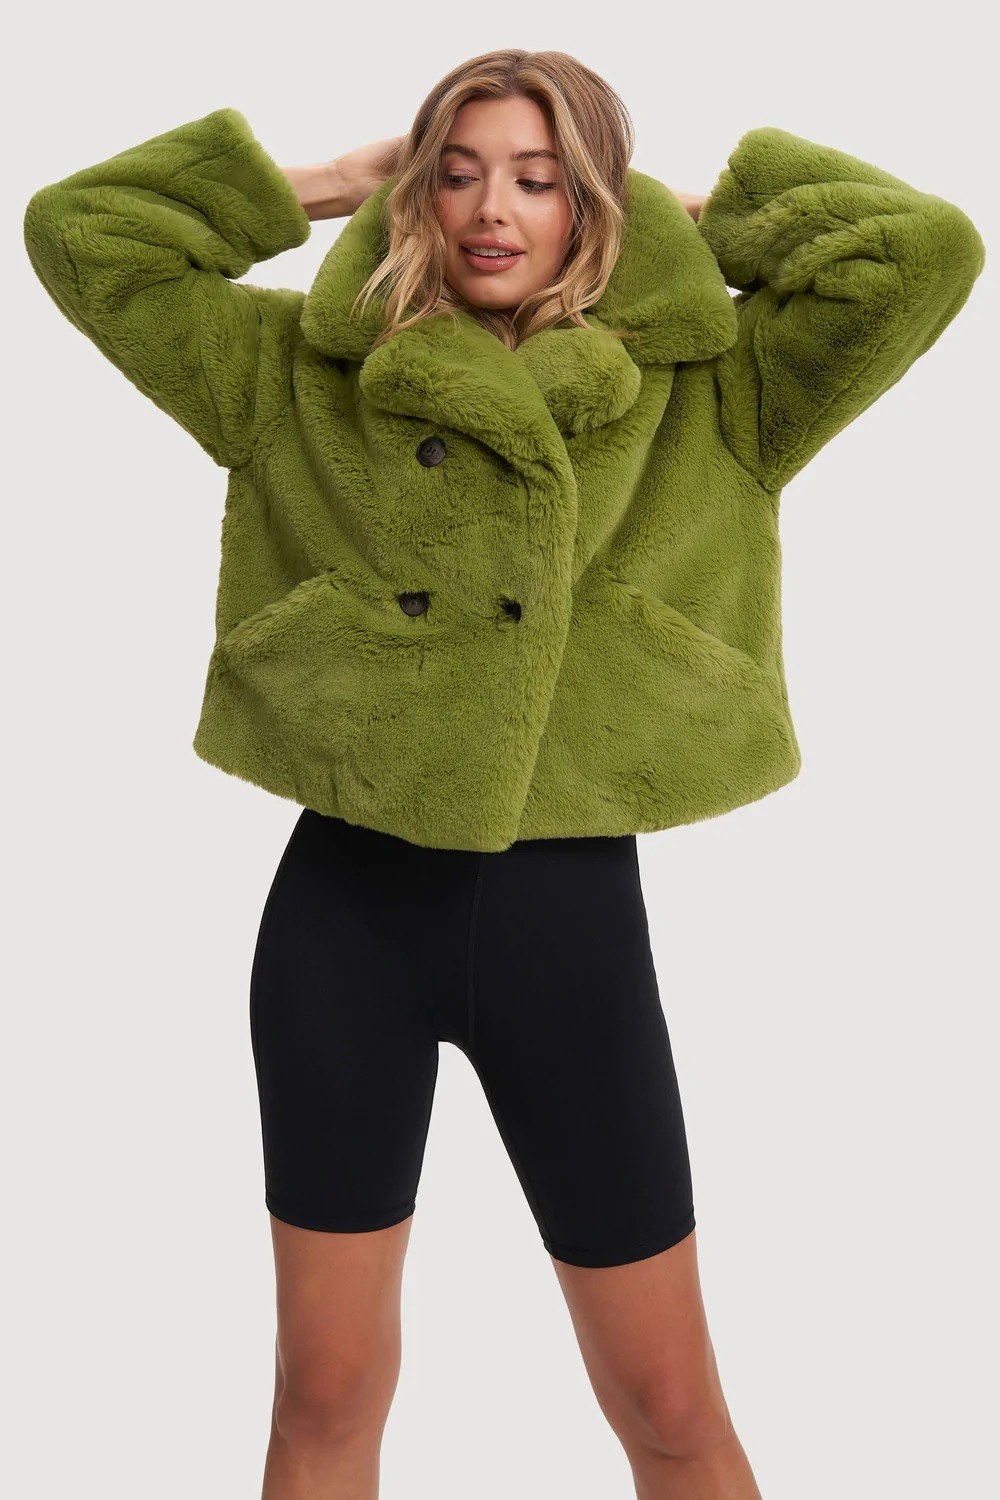 model in the palm green collared hip-length jacket